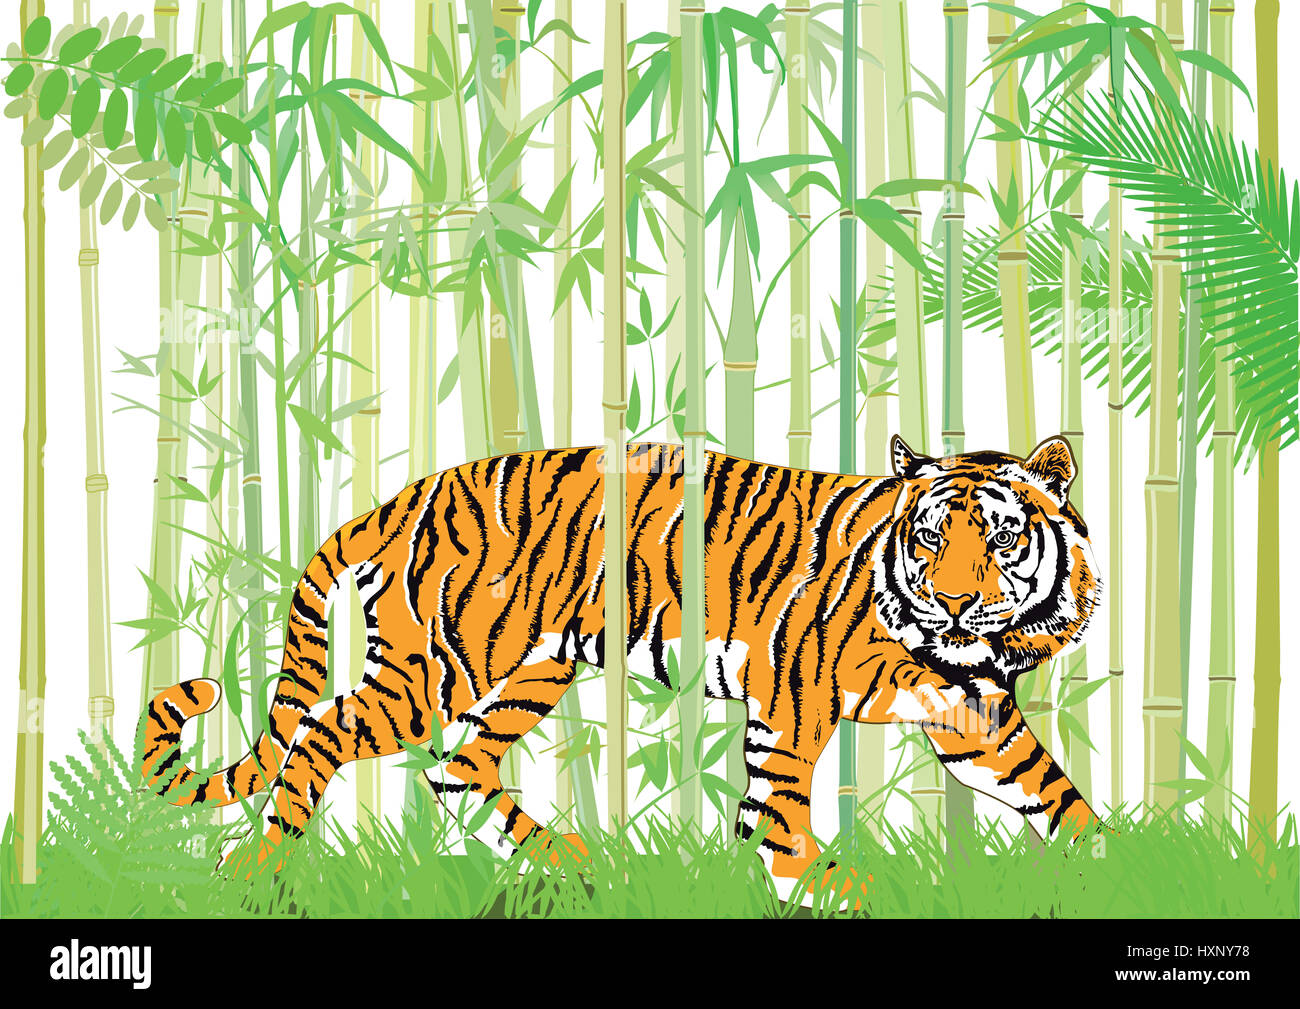 Tiger in the bamboo jungle Stock Photo